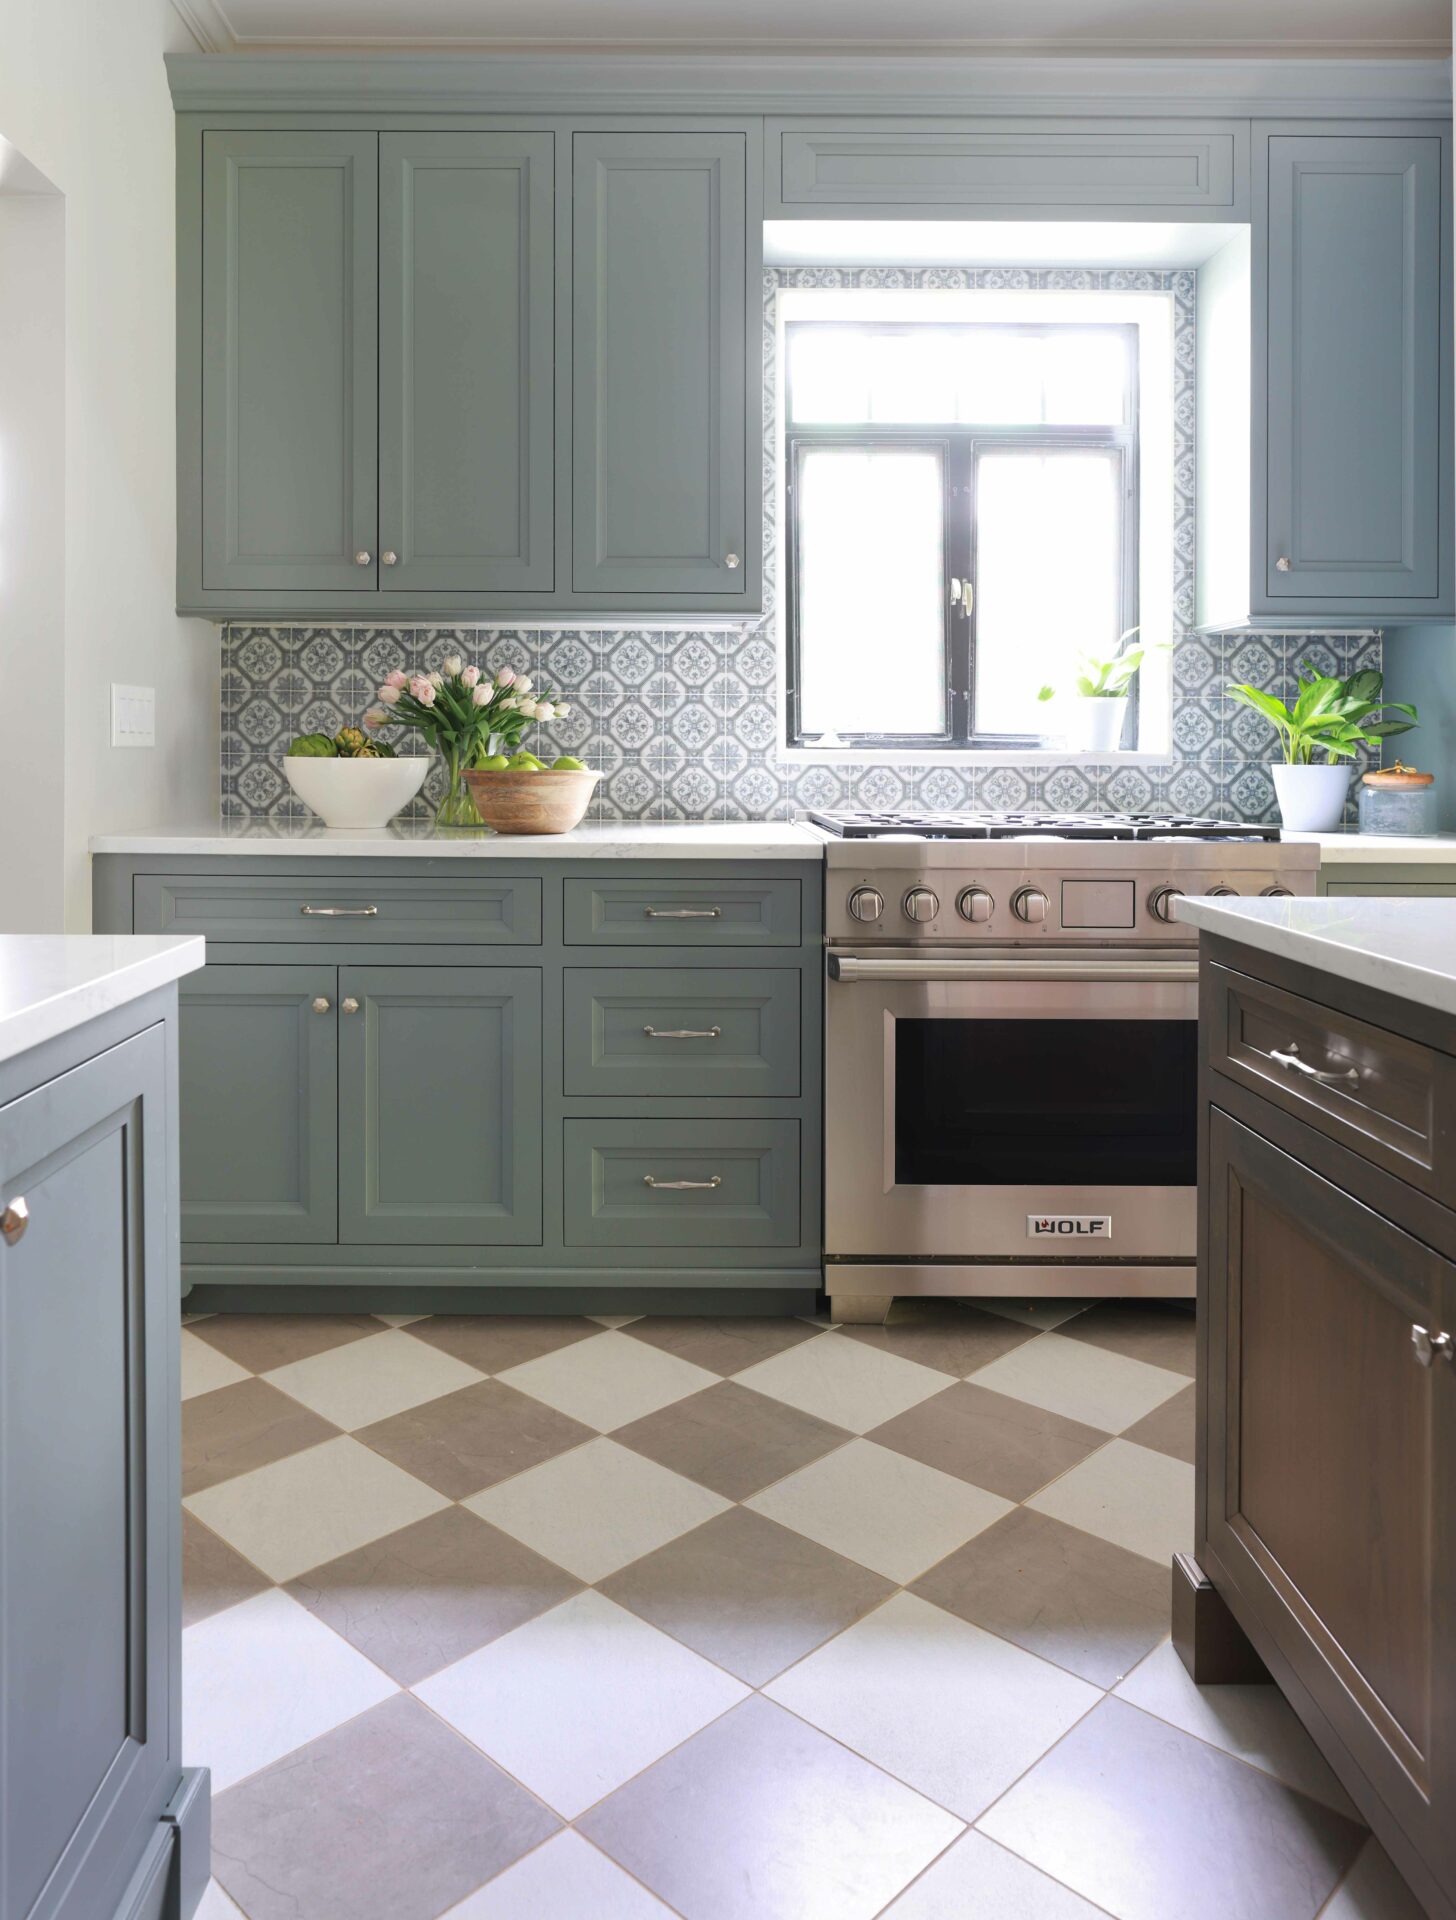 Gray painted and wood stained cabinets in a vintage inspired kitchen with checkered floor tile